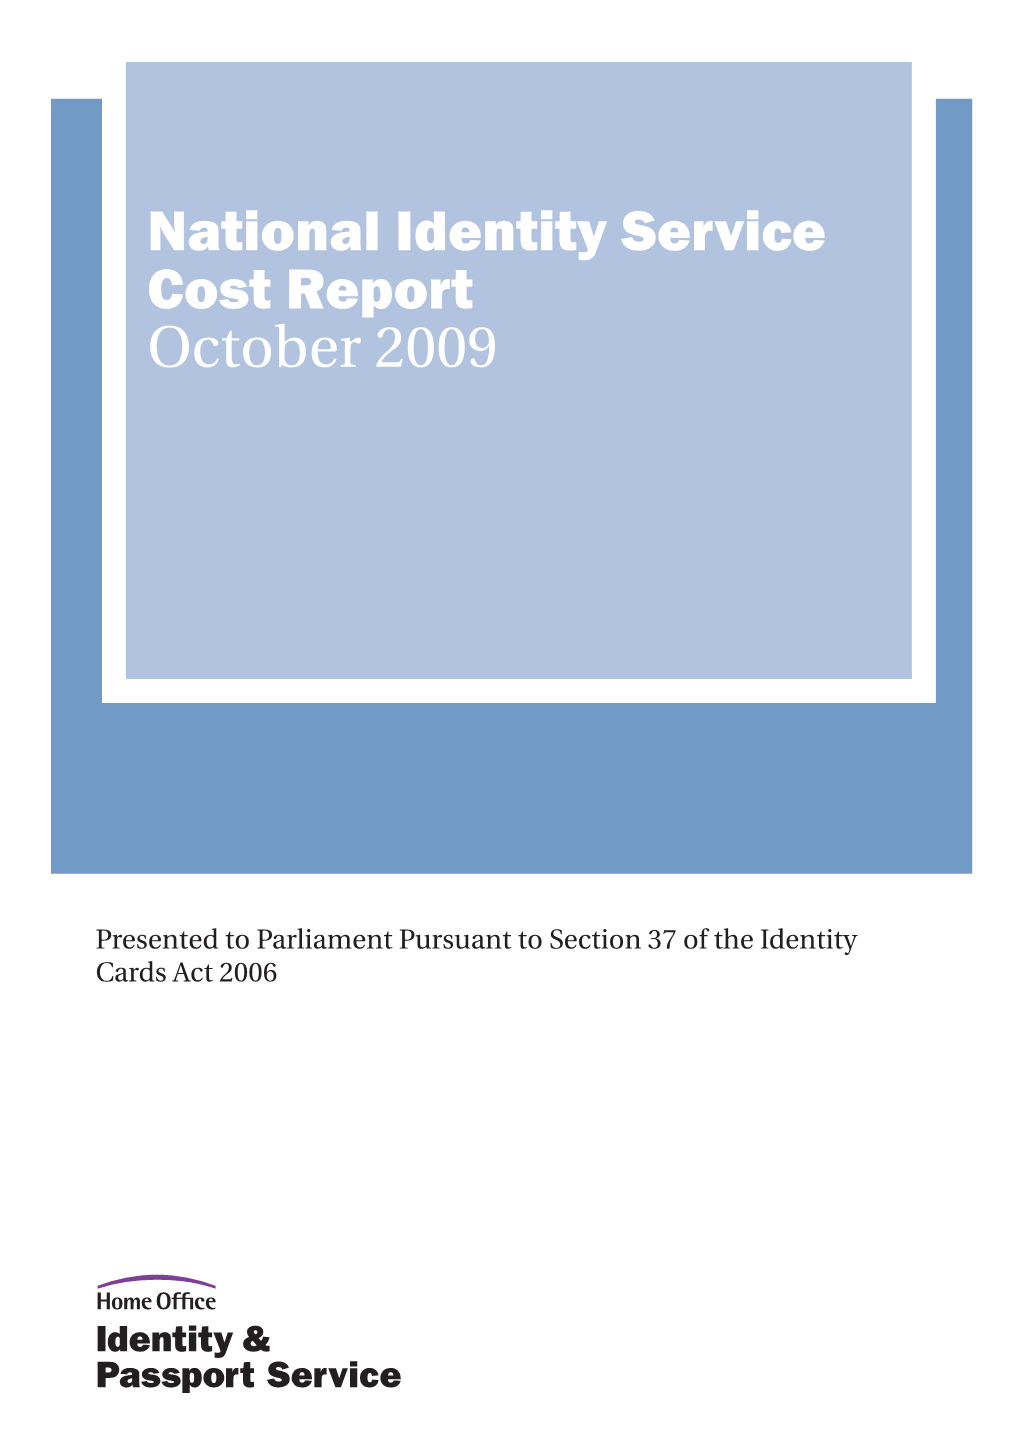 National Identity Service Cost Report October 2009